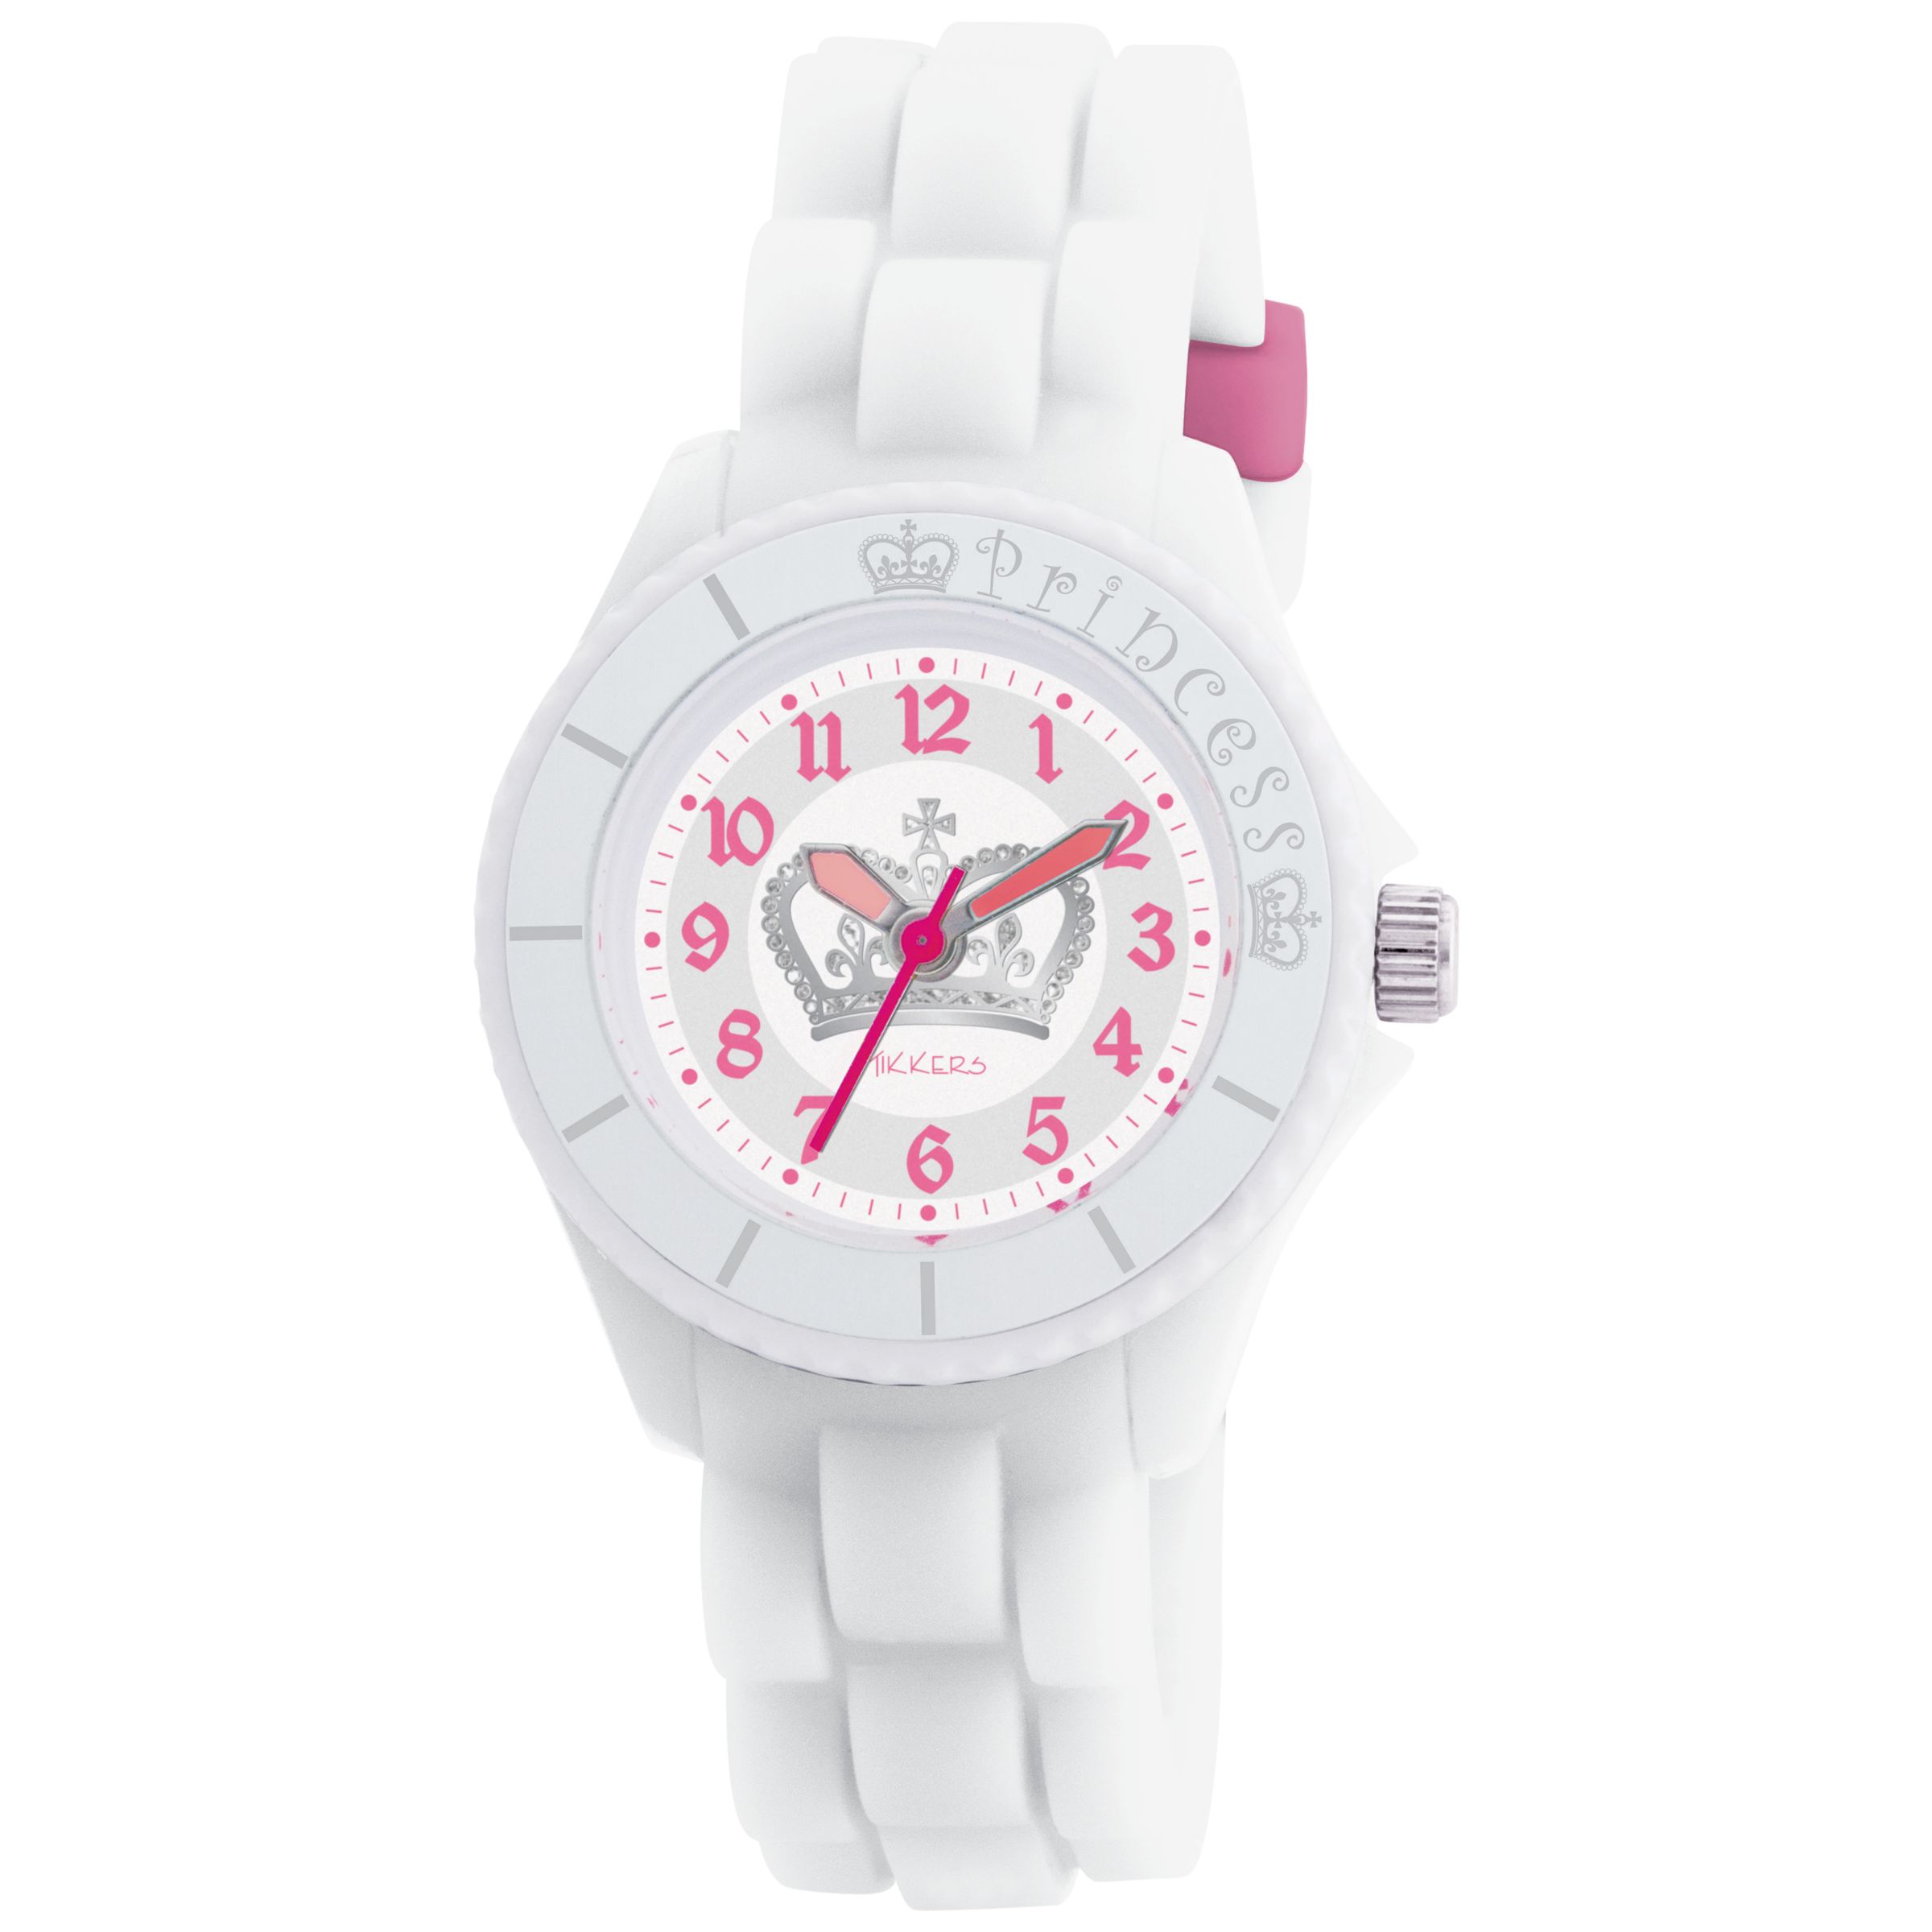 Tikkers TK0022 Kids Crown Rubber Strap with Pink Accents Watch, White